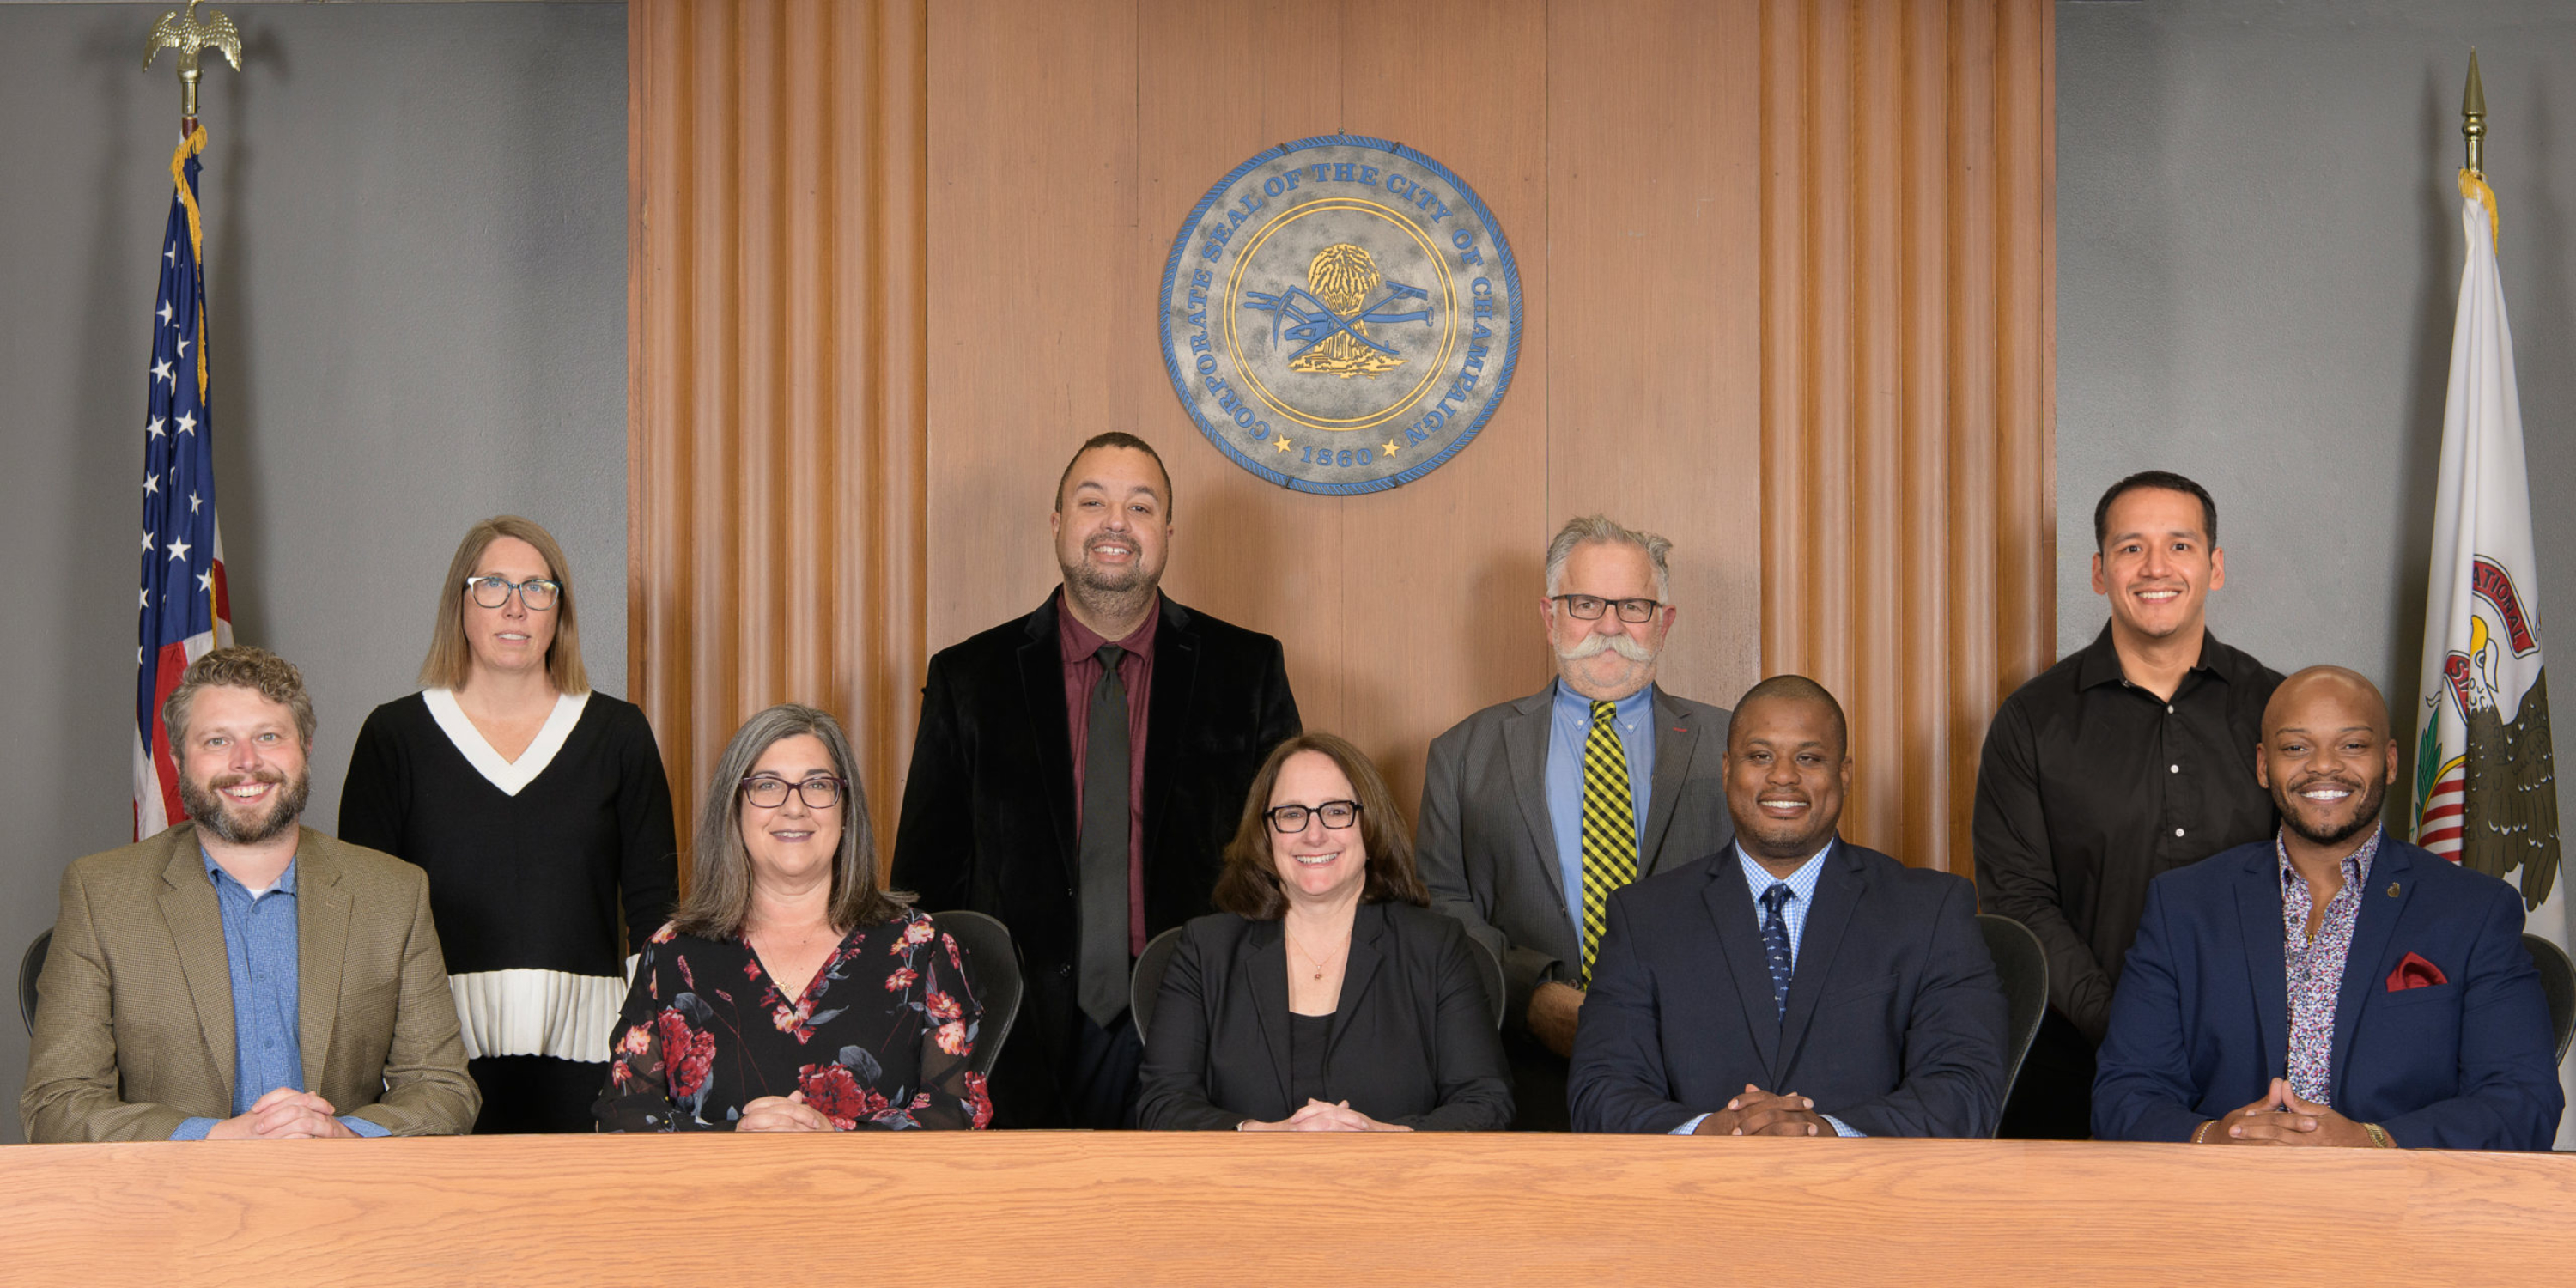 Group photo of the Champaign City Council - November 2022